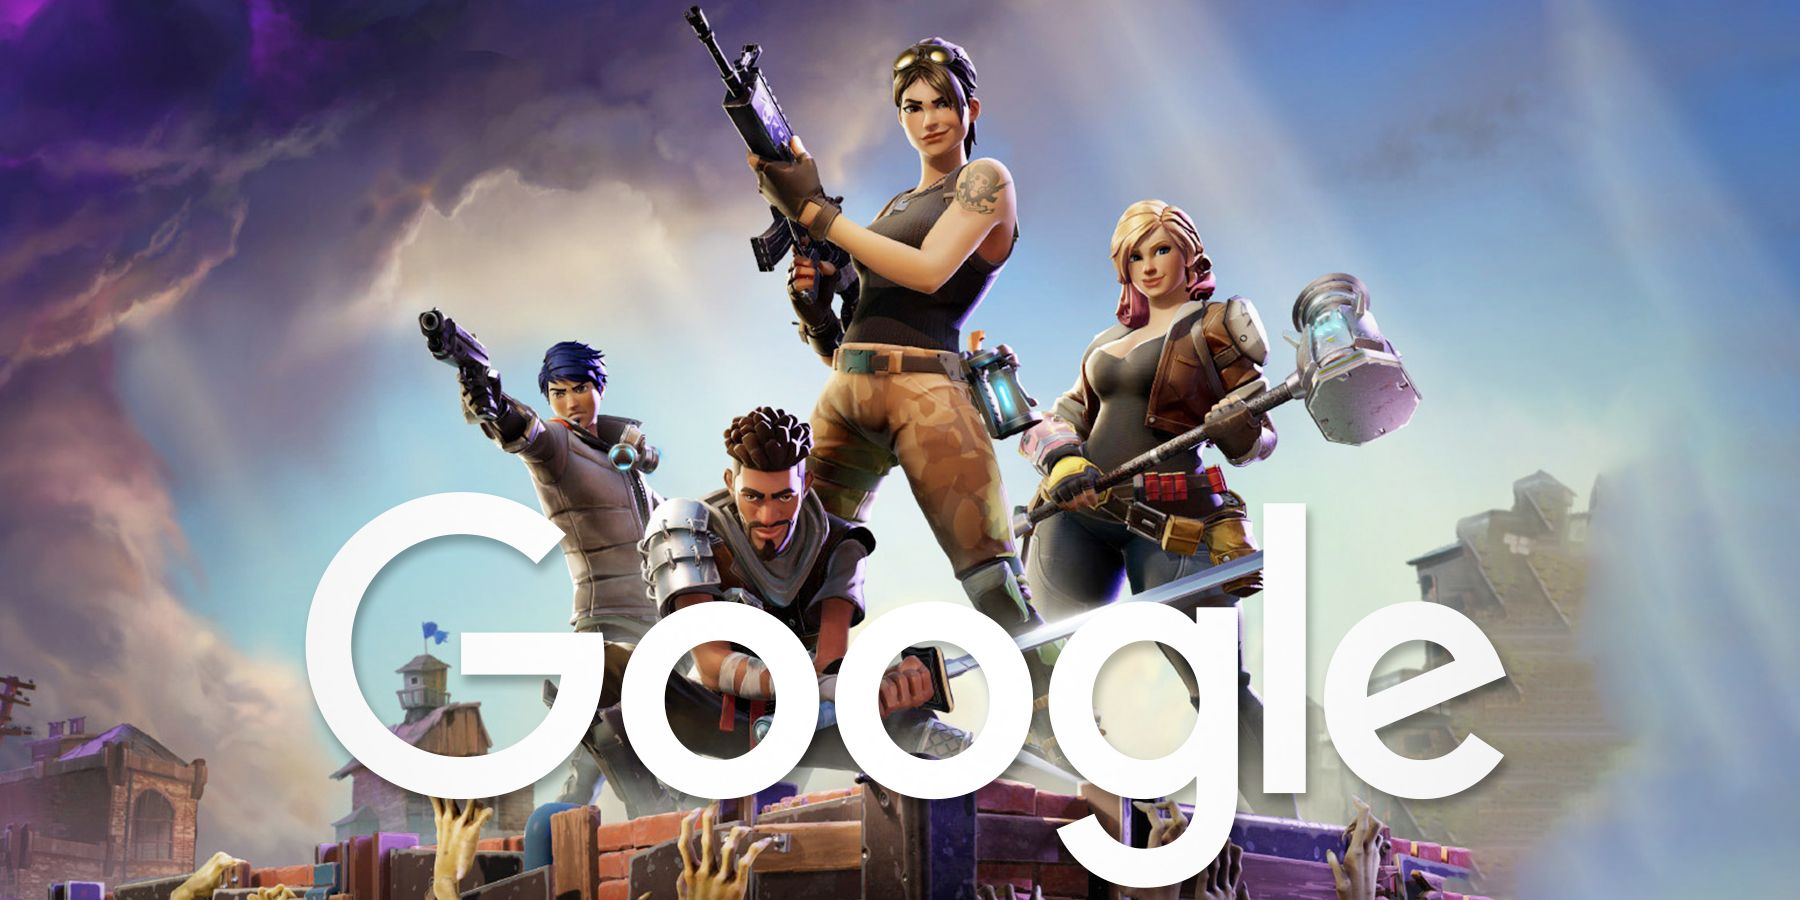 Fortnite character promo with white Google logo